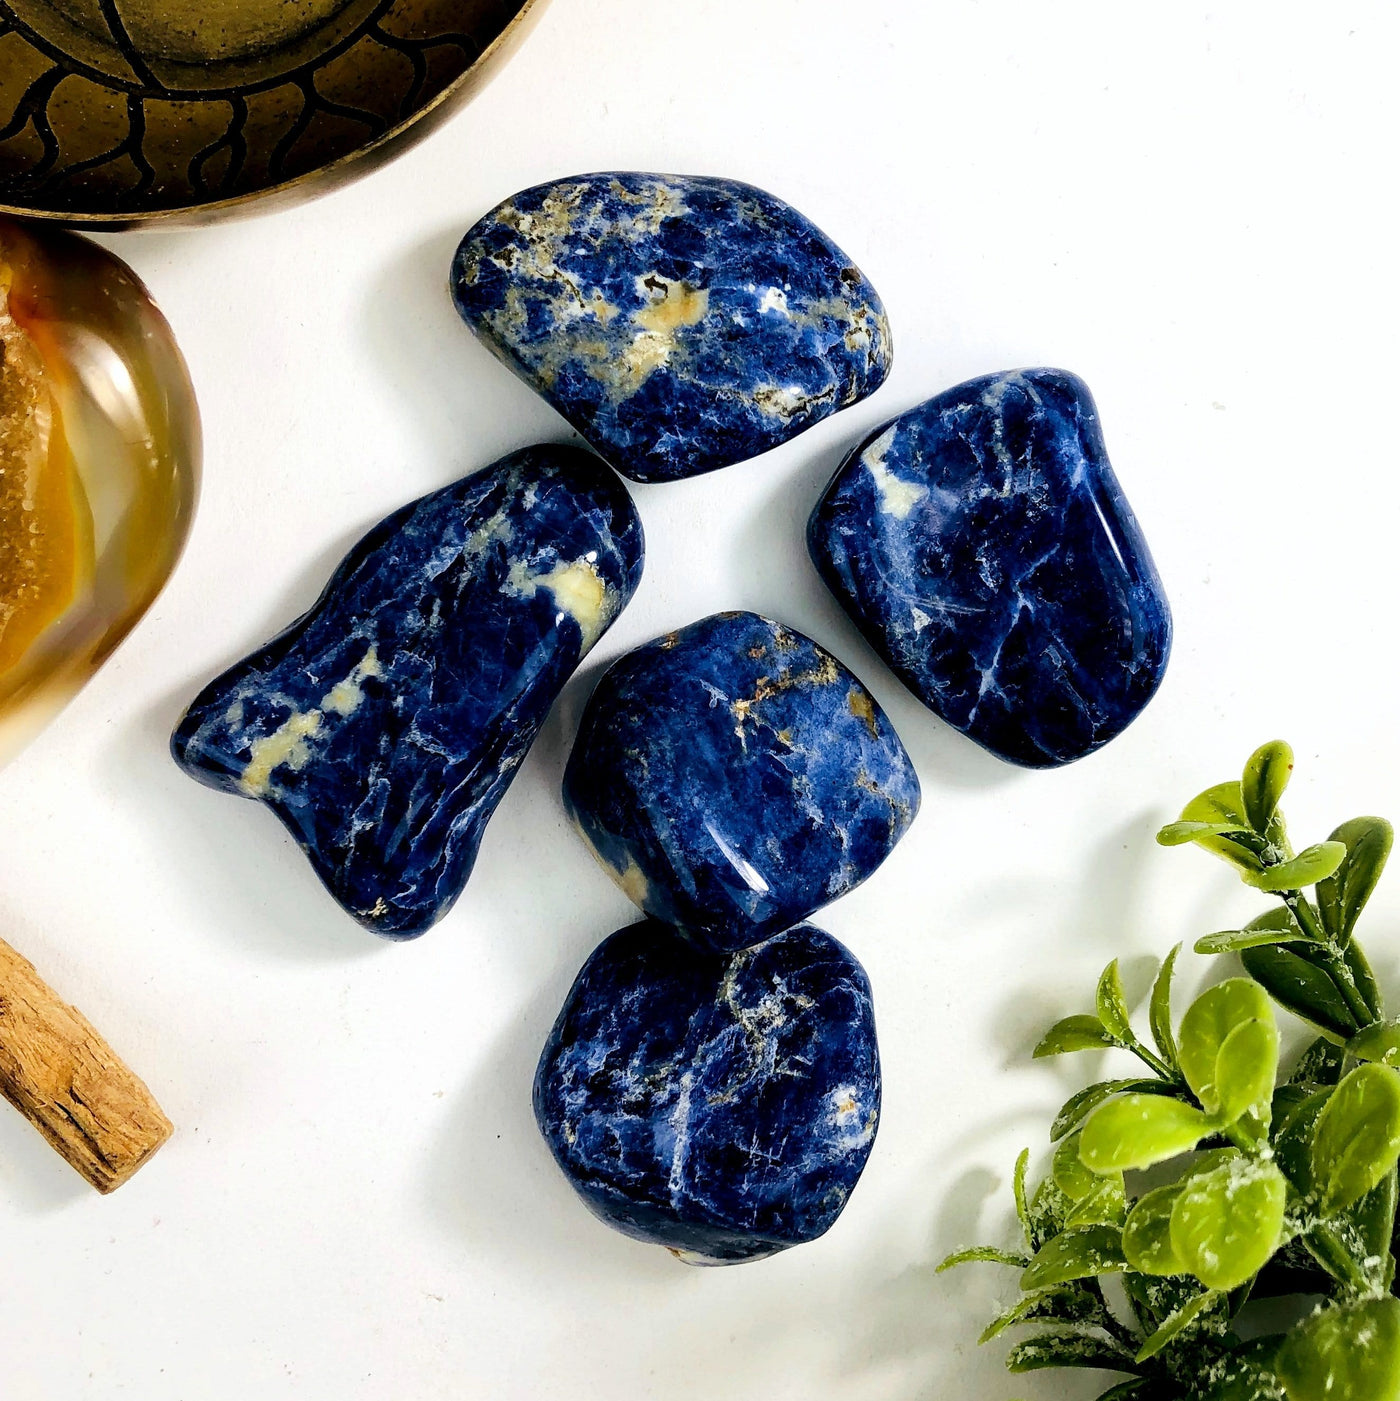 Blue Sodalite Tumbled Stones Gemstones - Polished Stones - Jewelry supplies - Arts and Crafts (TS-84)